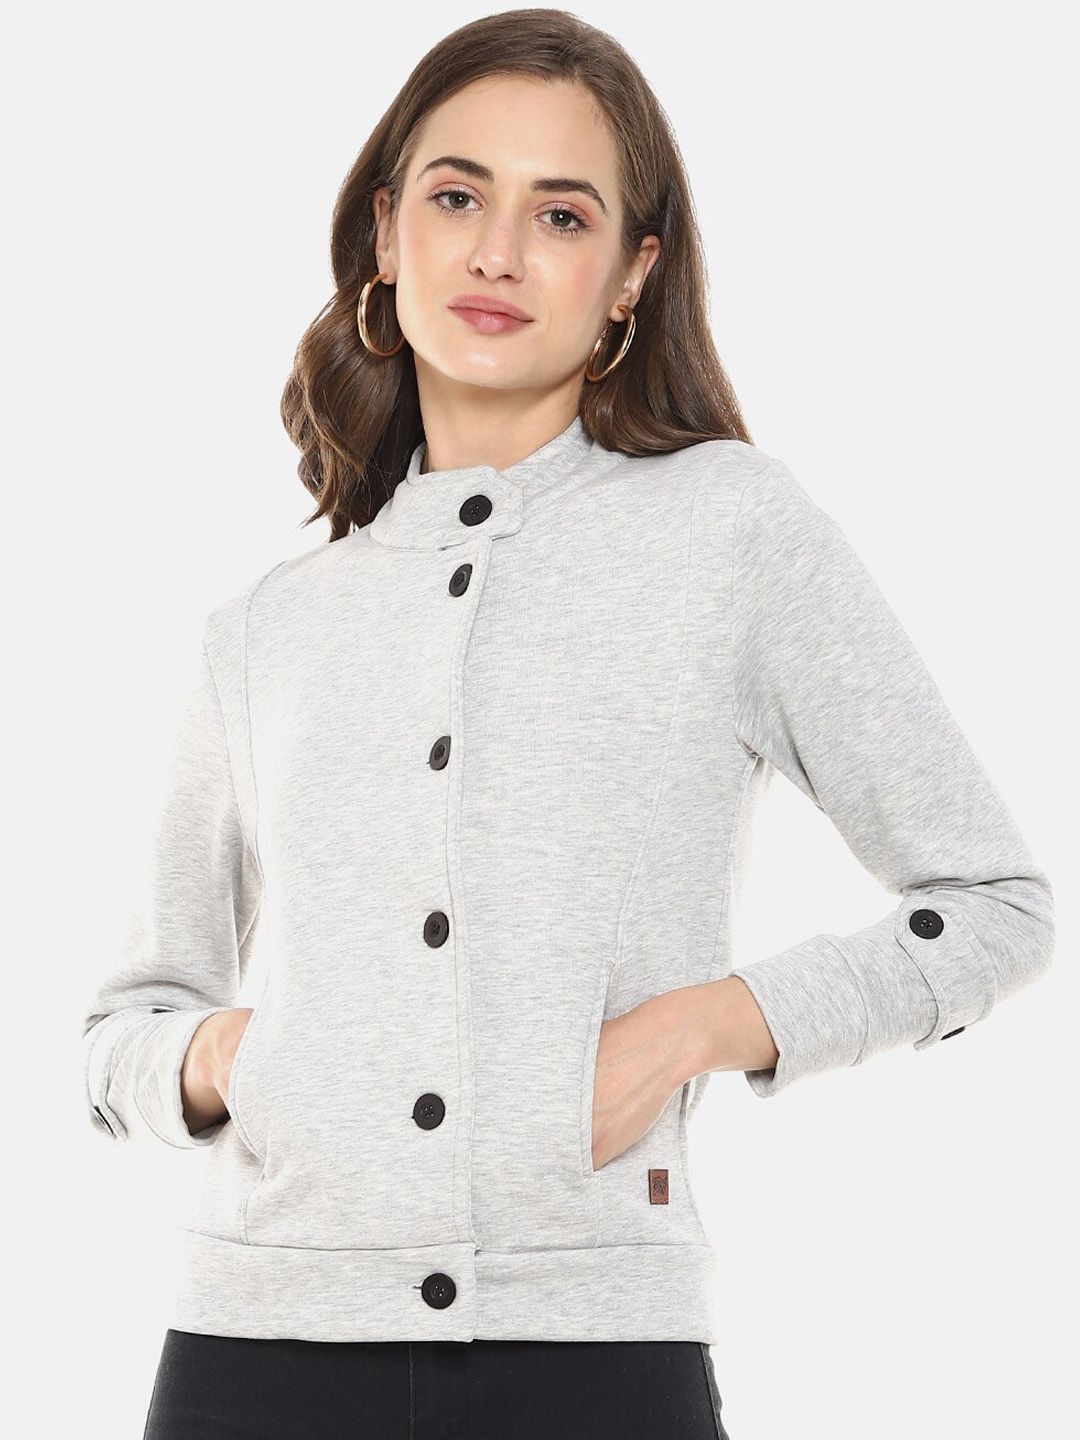 Campus Sutra Women Grey Windcheater Tailored Jacket Price in India